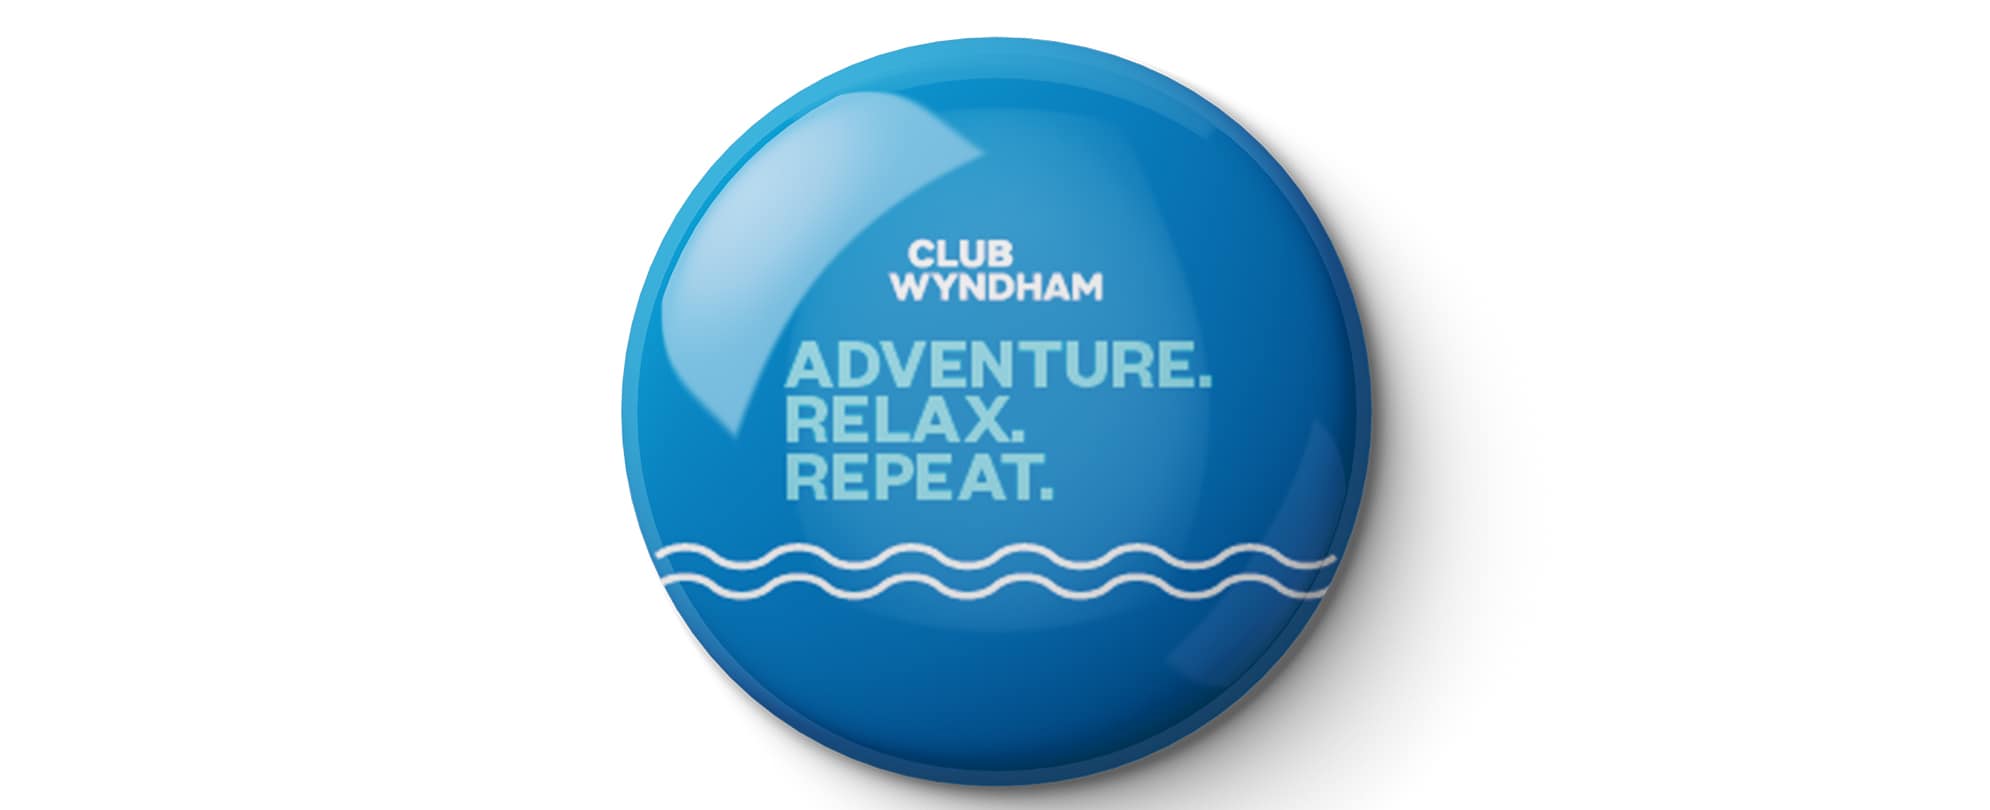 A blue "Adventure. Relax. Repeat." Club Wyndham pin